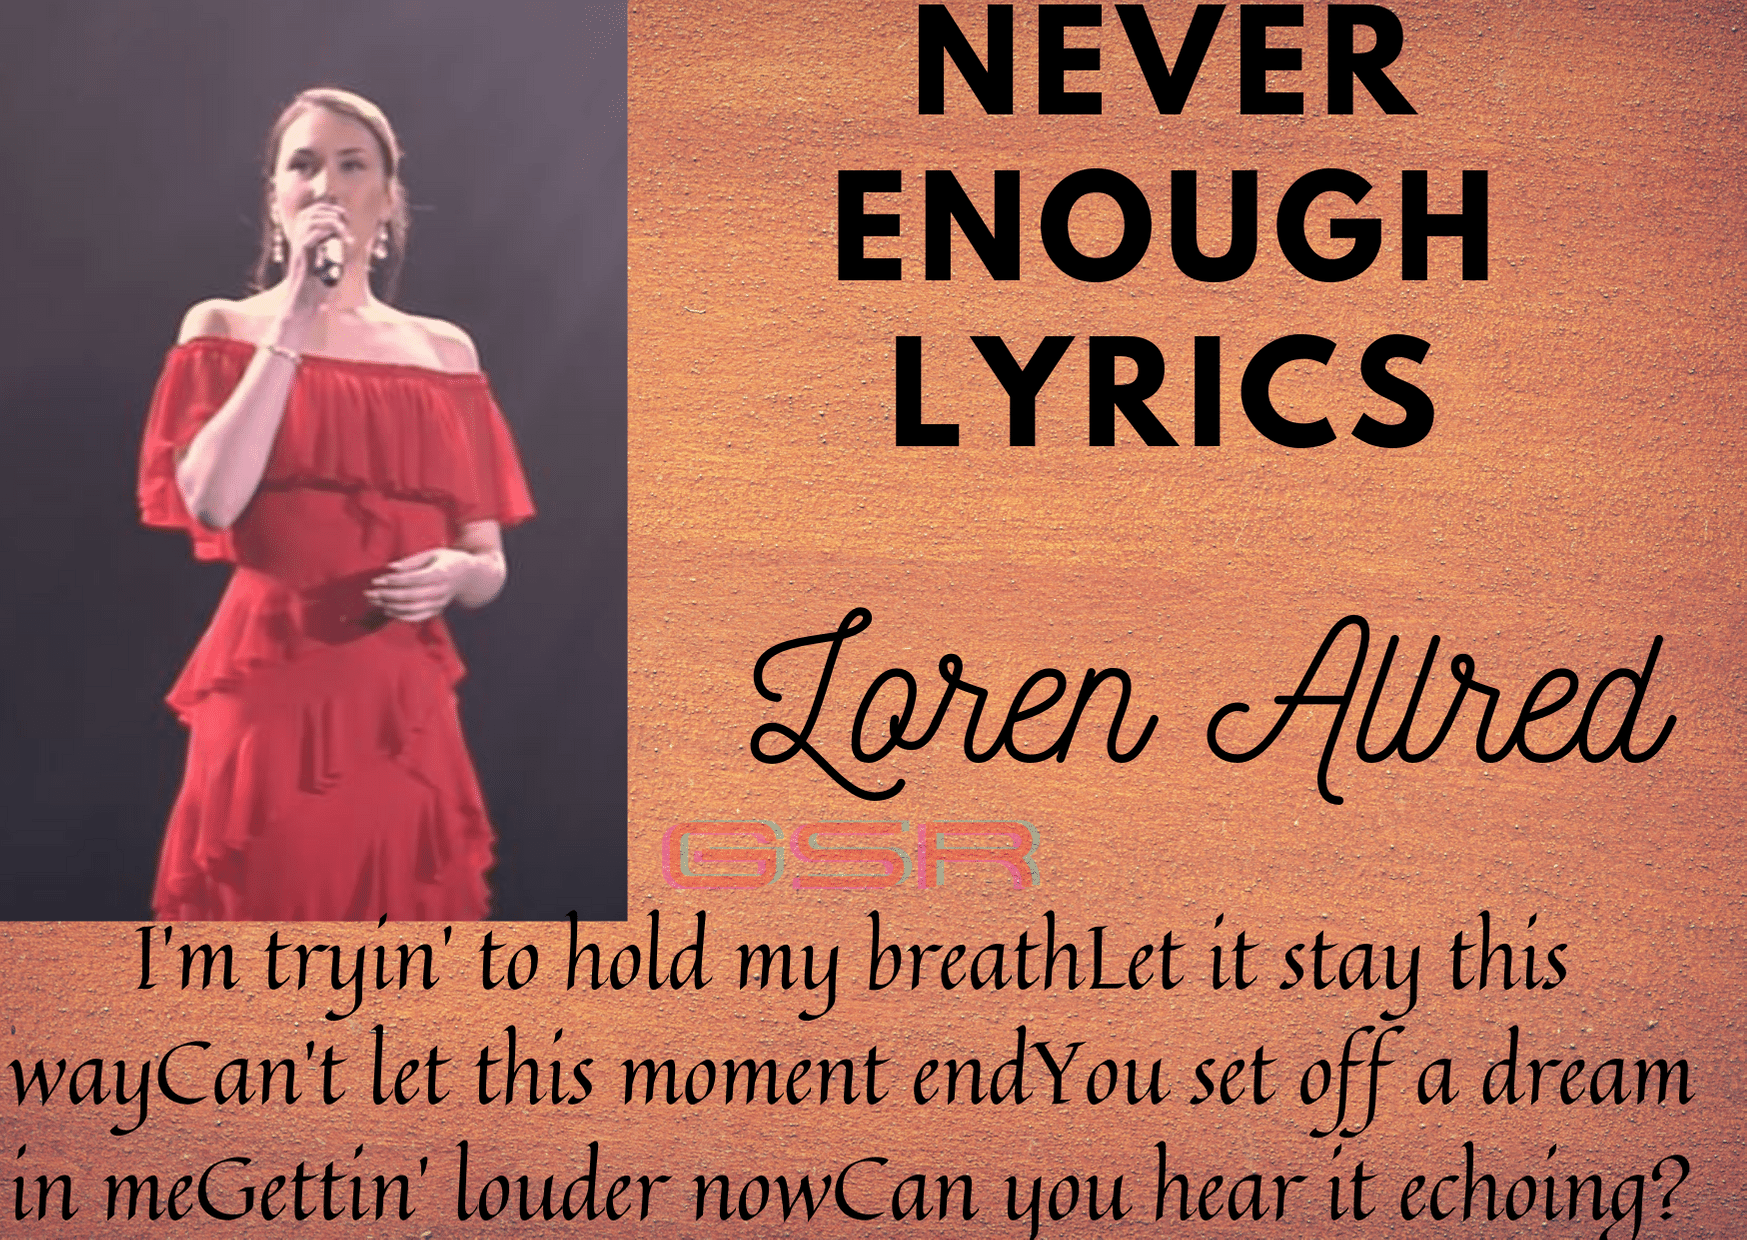 Loren Allred Never Enough Lyrics Never Enough Lyrics Loren Allred is an American singer, songwriter, and pianist. Allred made her Billboard debut with "Never Enough" from the soundtrack to the musical The Greatest Showman. [su_youtube url="https://youtu.be/enrCBI7O_6I" autoplay="yes"] [su_heading]Never Enough Lyrics[/su_heading] I'm tryin' to hold my breath Let it stay this way Can't let this moment end You set off a dream in me Gettin' louder now Can you hear it echoing? Take my hand Will you share this with me? 'Cause darling without you All the shine of a thousand spotlights All the stars we steal from the night sky Will never be enough Never be enough Towers of gold are still too little These hands could hold the world but it'll Never be enough Never be enough For me Never, never Never, never Never, for me For me Never enough Never enough Never enough For me For me For me All the shine of a thousand spotlights All the stars we steal from the night sky Will never be enough Never be enough Towers of gold are still too little These hands could hold the world but it'll Never be enough Never be enough For me Never, never Never, never Never, for me For me Never enough Never, never Never enough Never, never Never enough For me For me For me For me